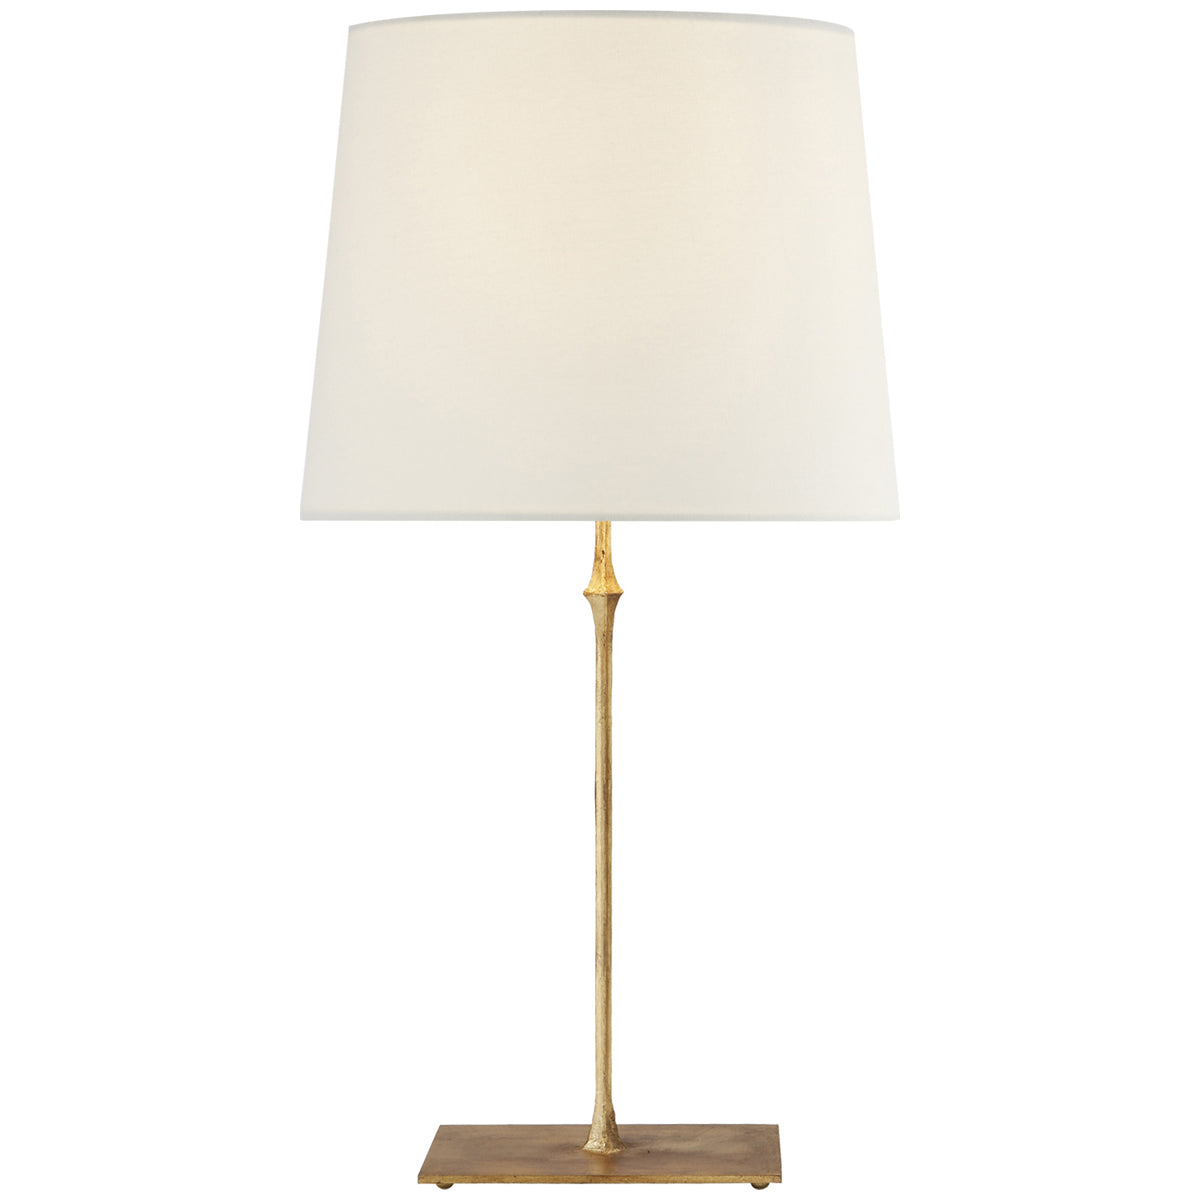 Visual Comfort Dauphine Table Lamp with Linen Shade